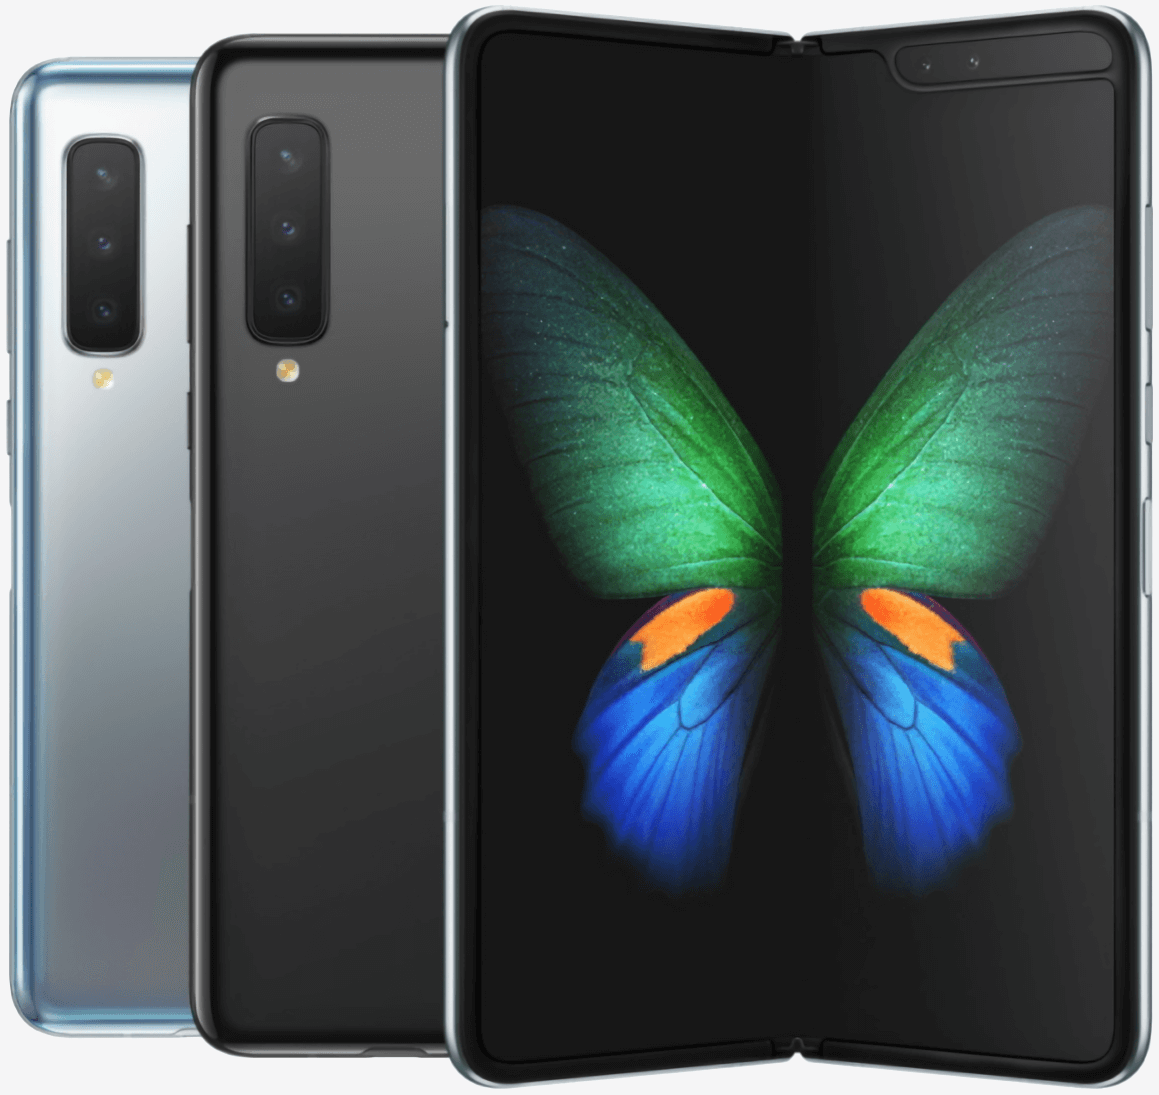 Samsung's revised Galaxy Fold gets tested at IFA 2019